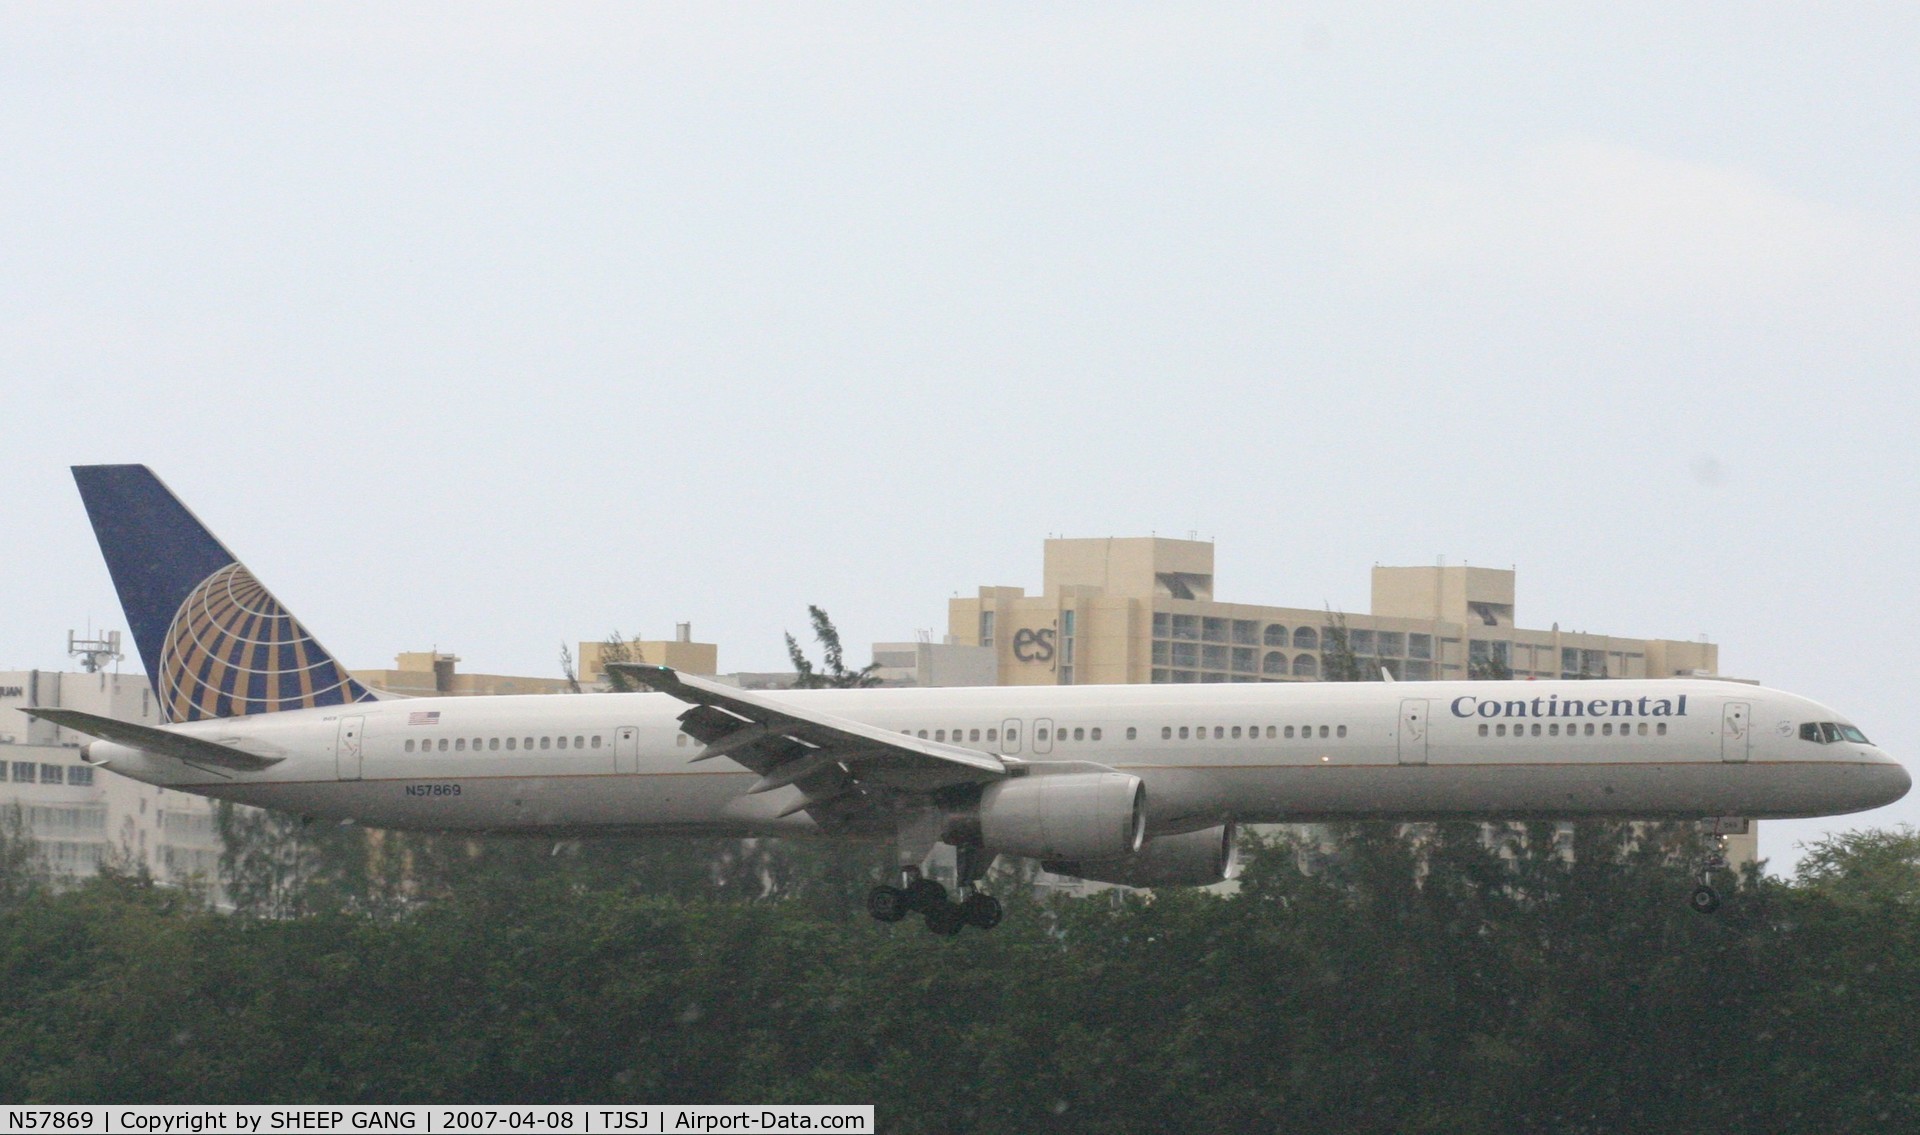 N57869, 2002 Boeing 757-33N C/N 32593, Continental airlines landing on a wet day